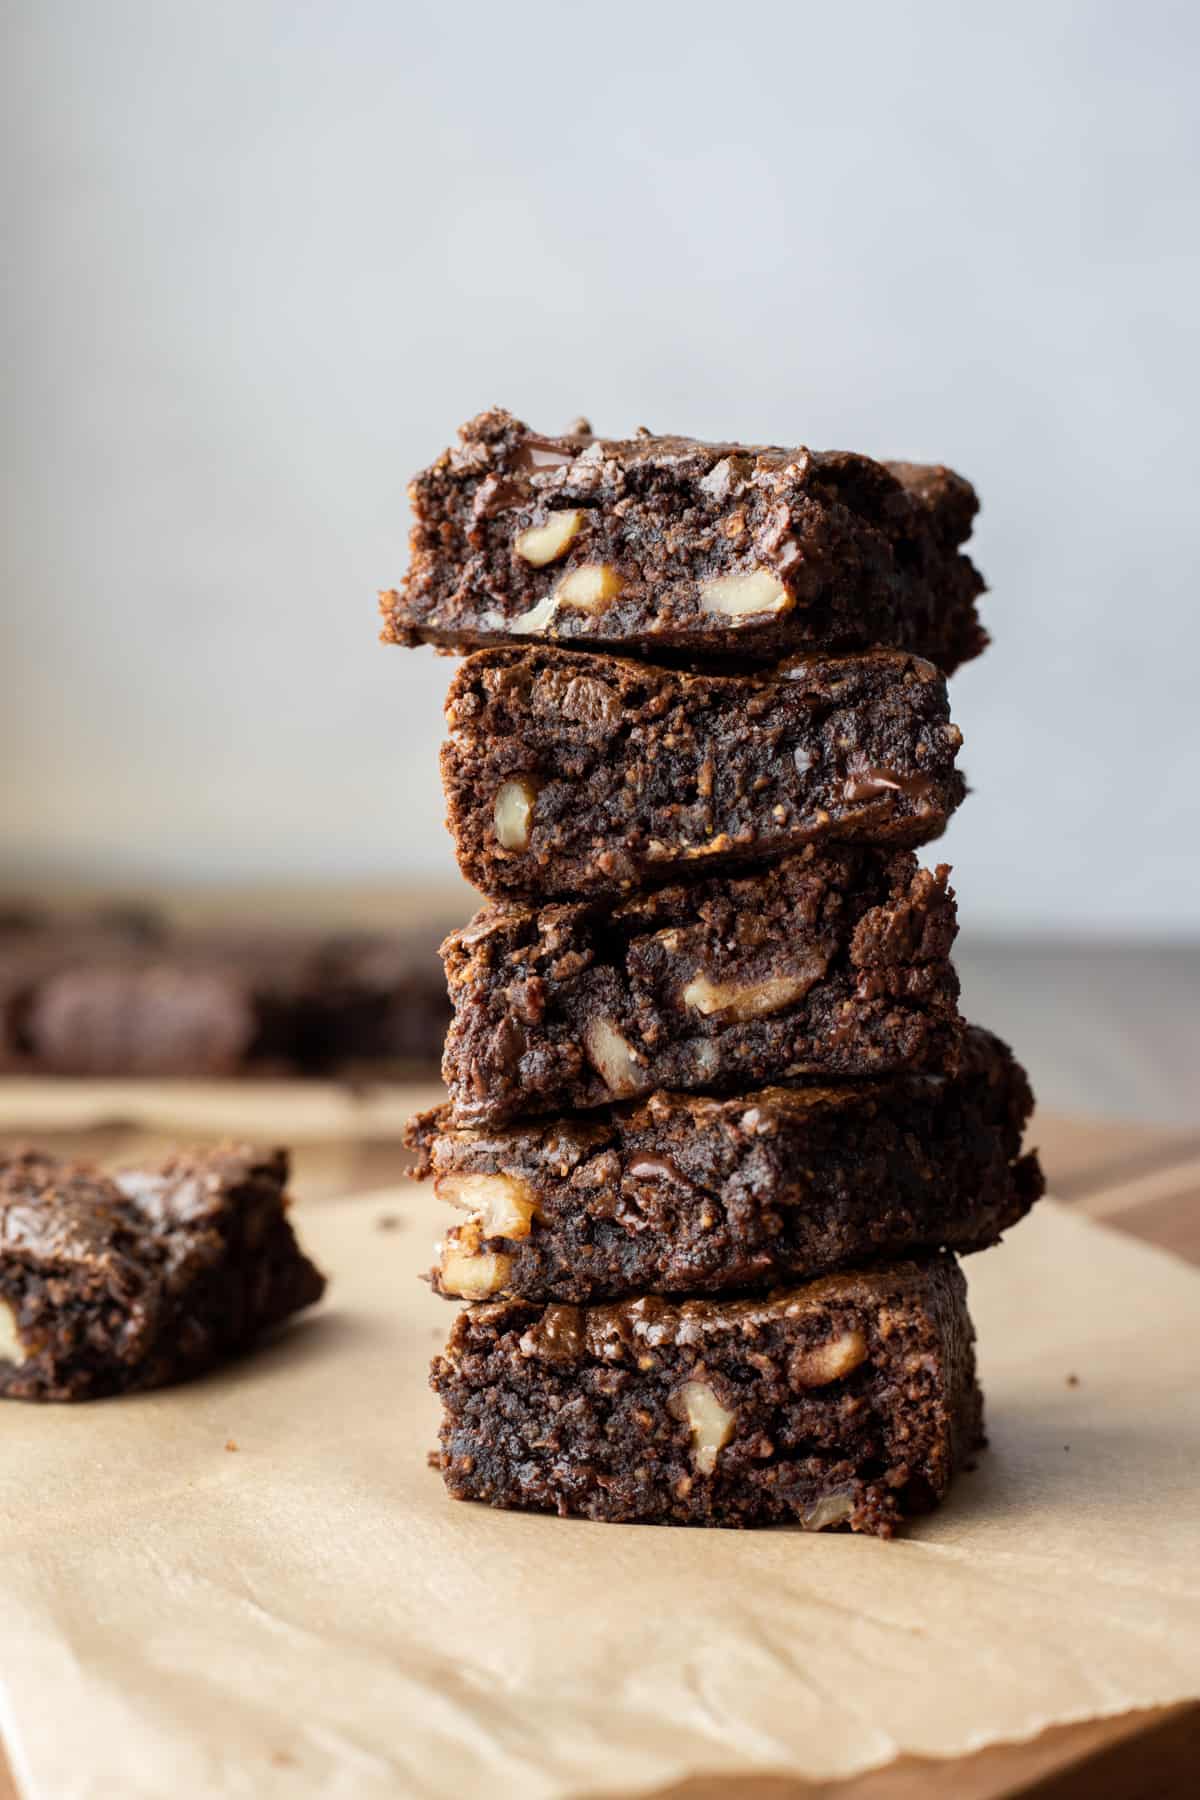 Five dark chocolate brownies with walnuts stacked and resting on a cutting board.